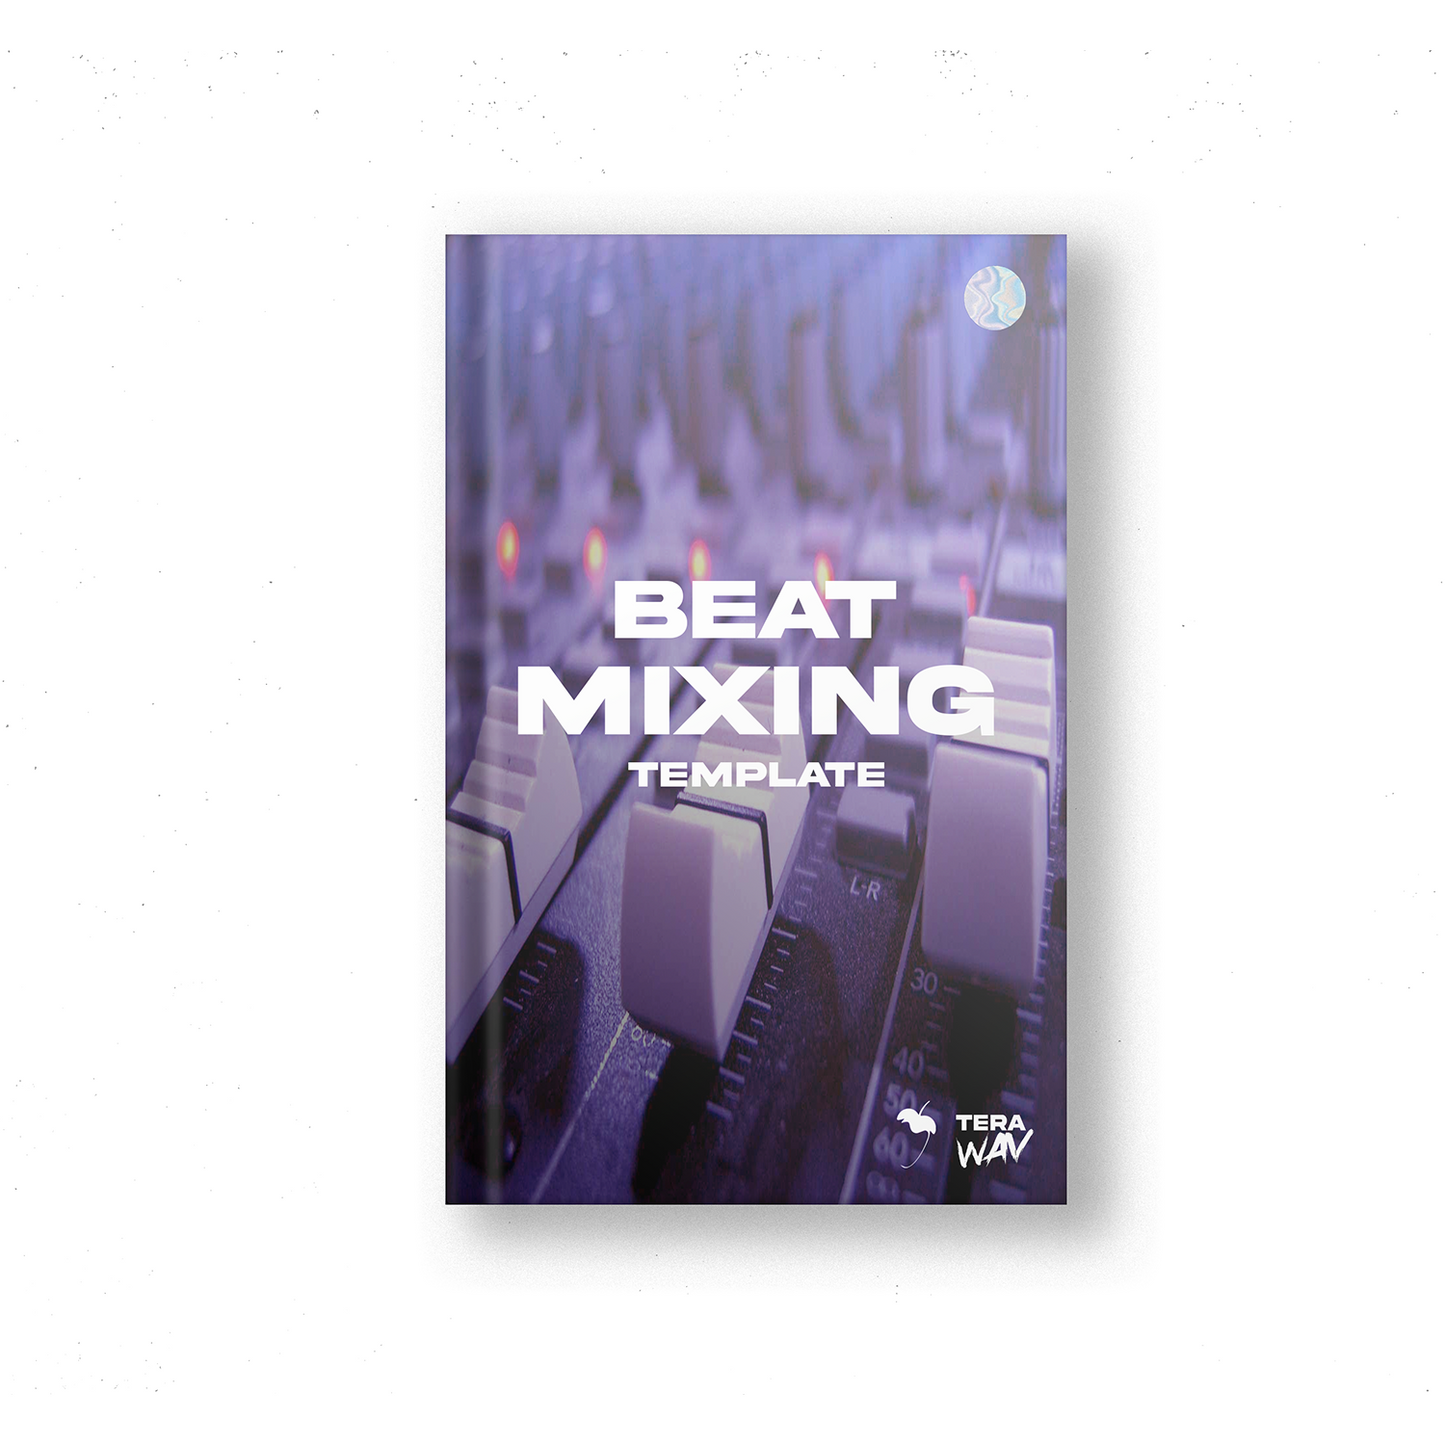 FL STUDIO BEAT MIXING TEMPLATE (MIXING PDF INCLUDED)